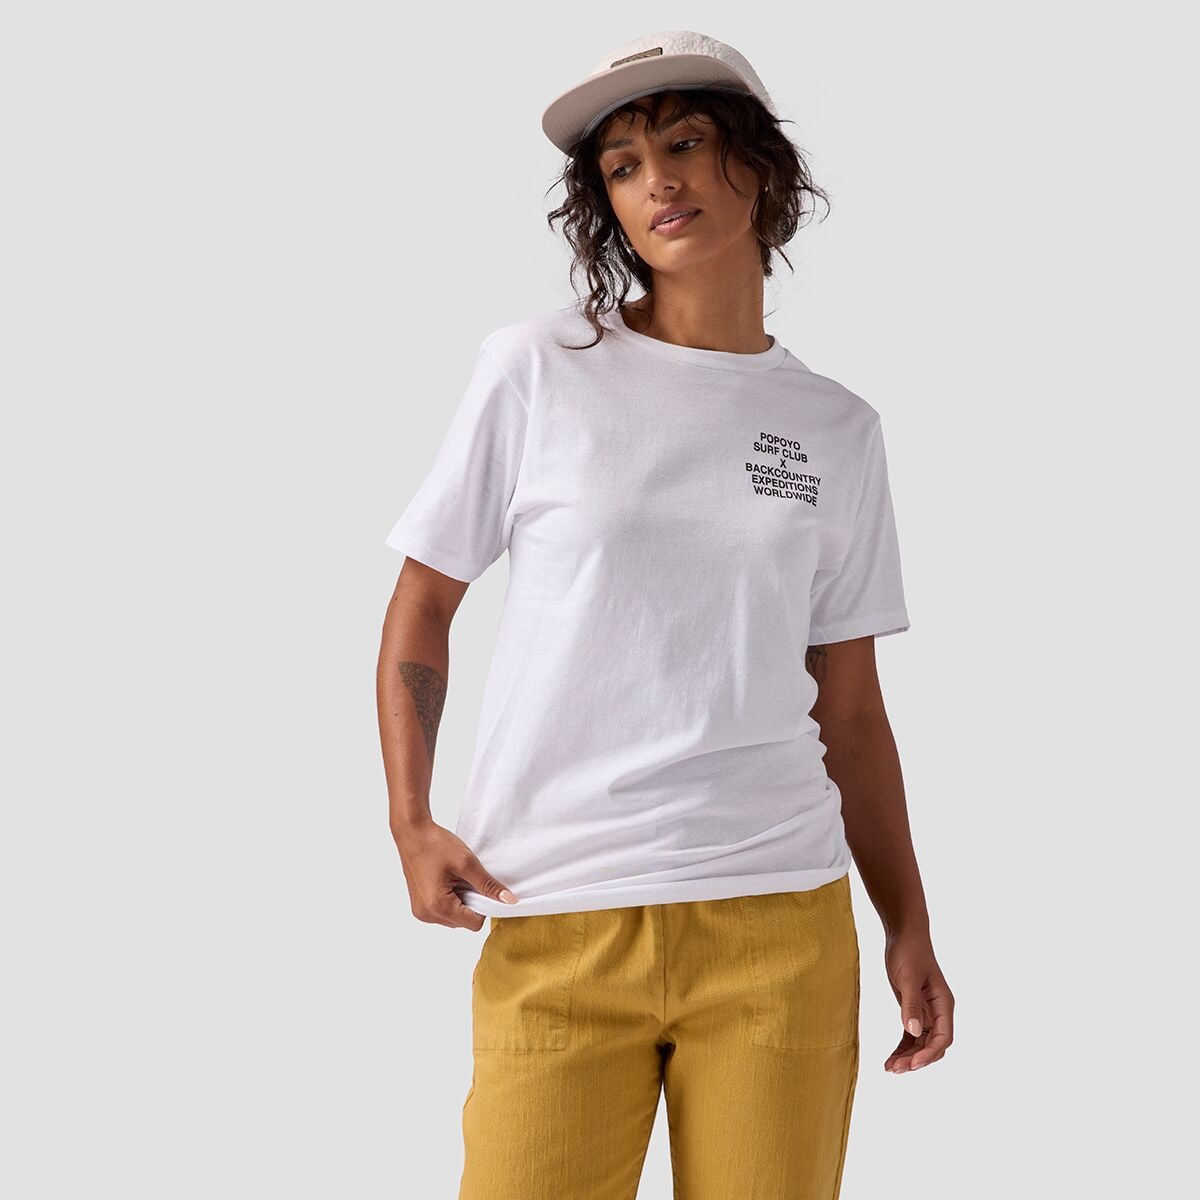 Popoyo x Backcountry Expeditions Surf Club T-Shirt Backcountry